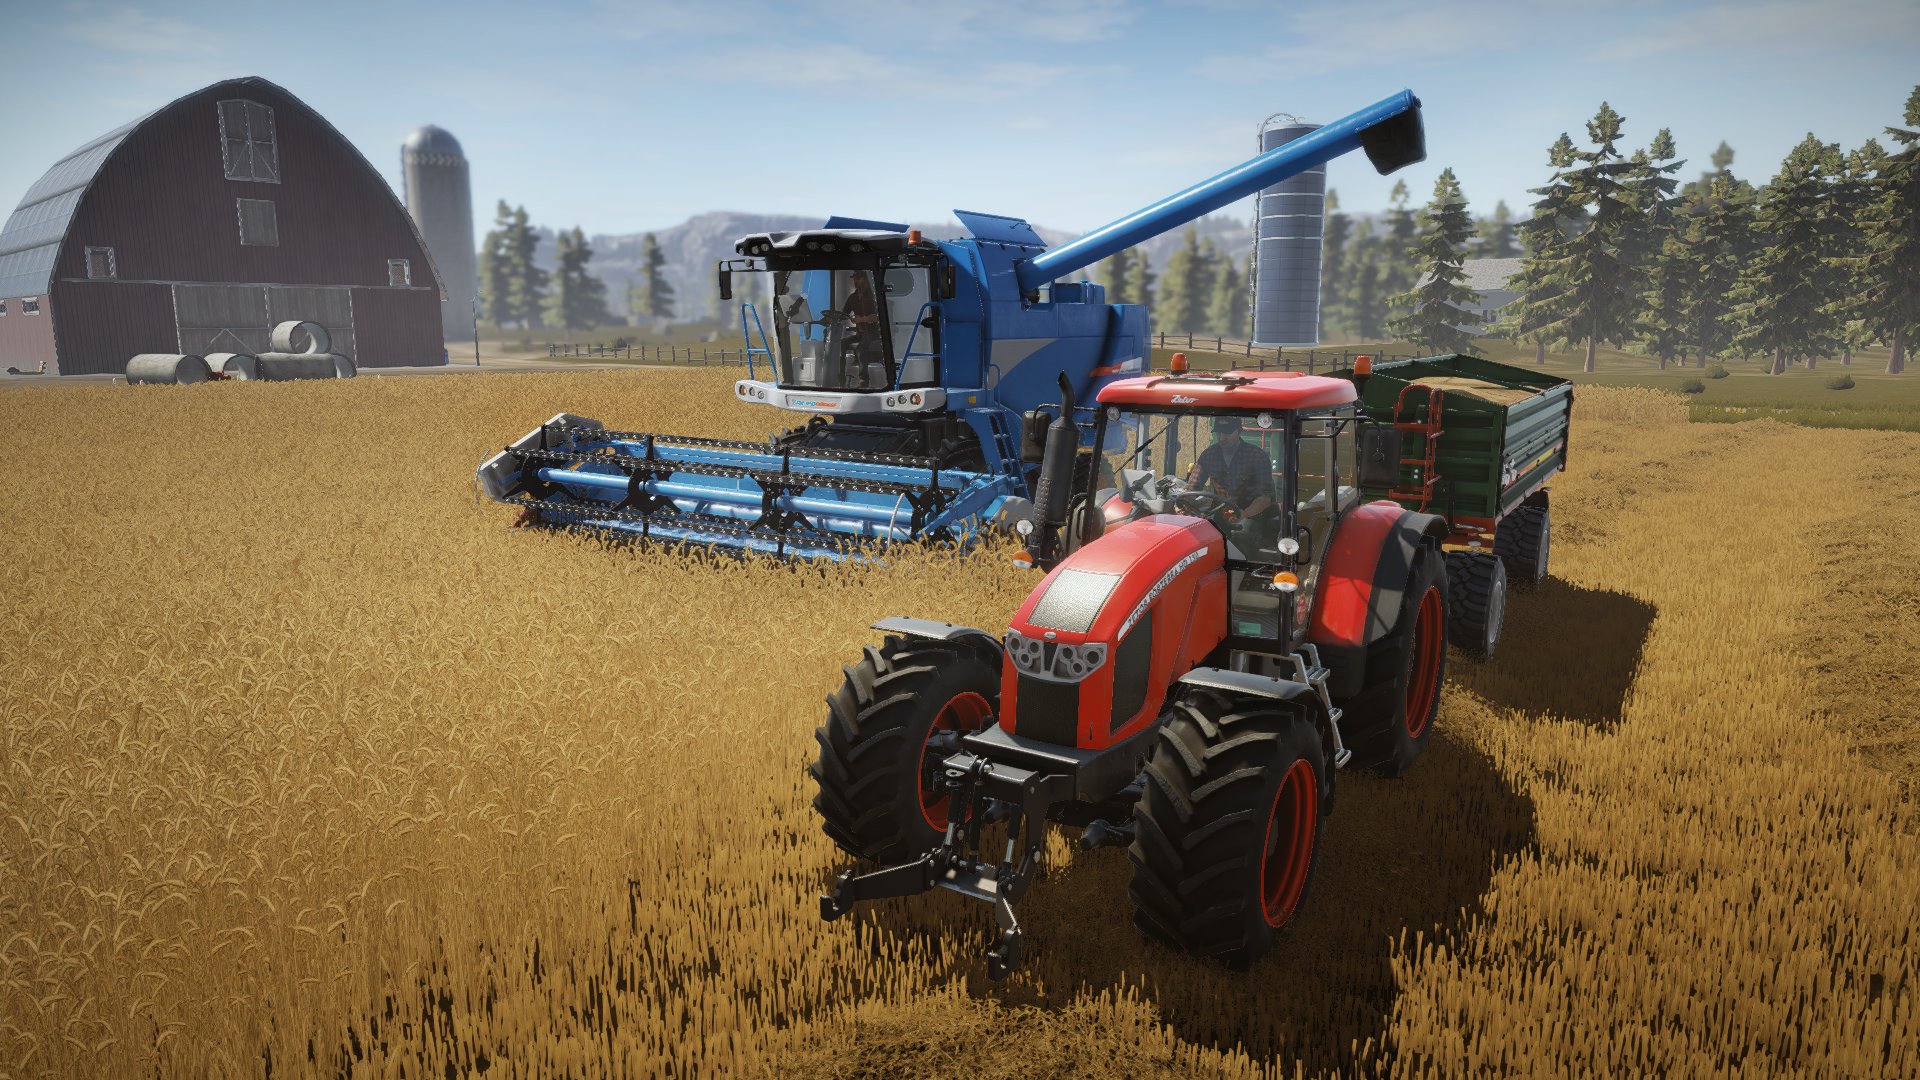 pure farming 2018 download for android